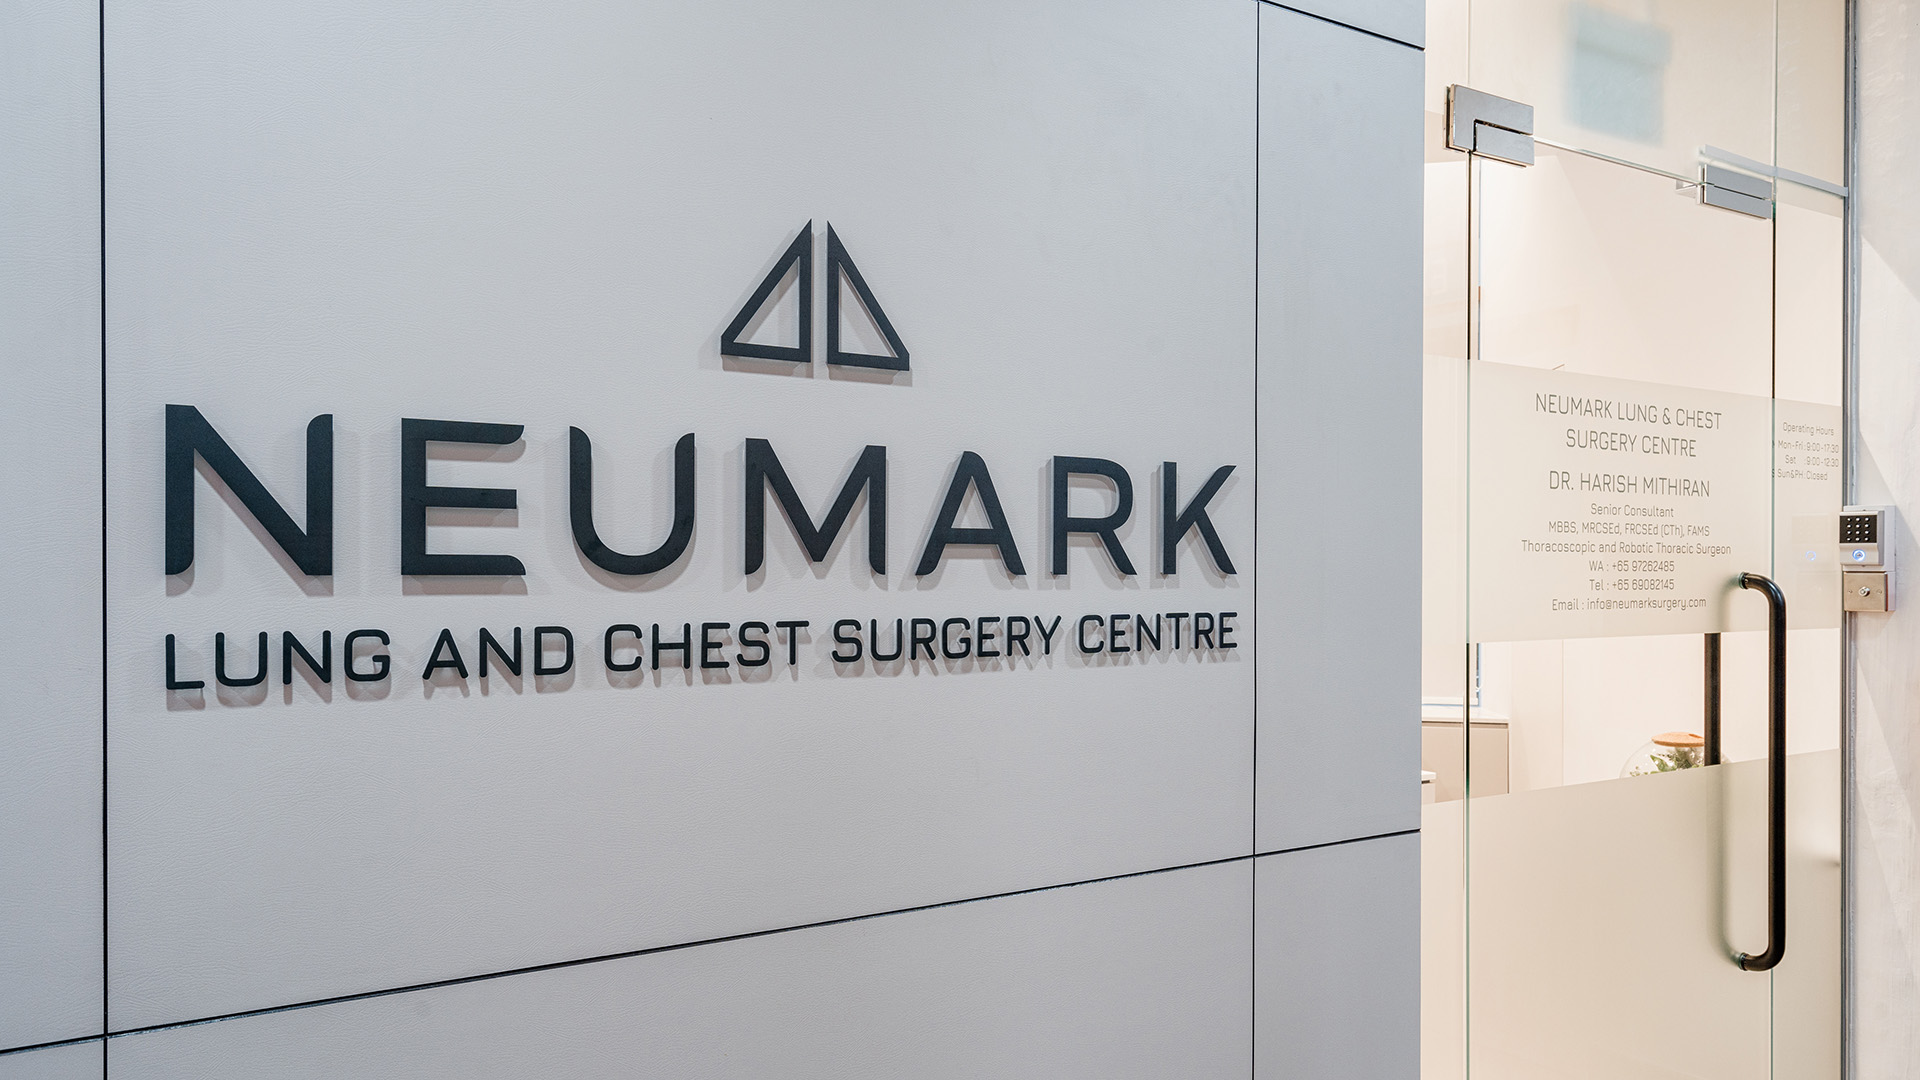 Neumark Lung and Chest Surgery Centre Gleneagles